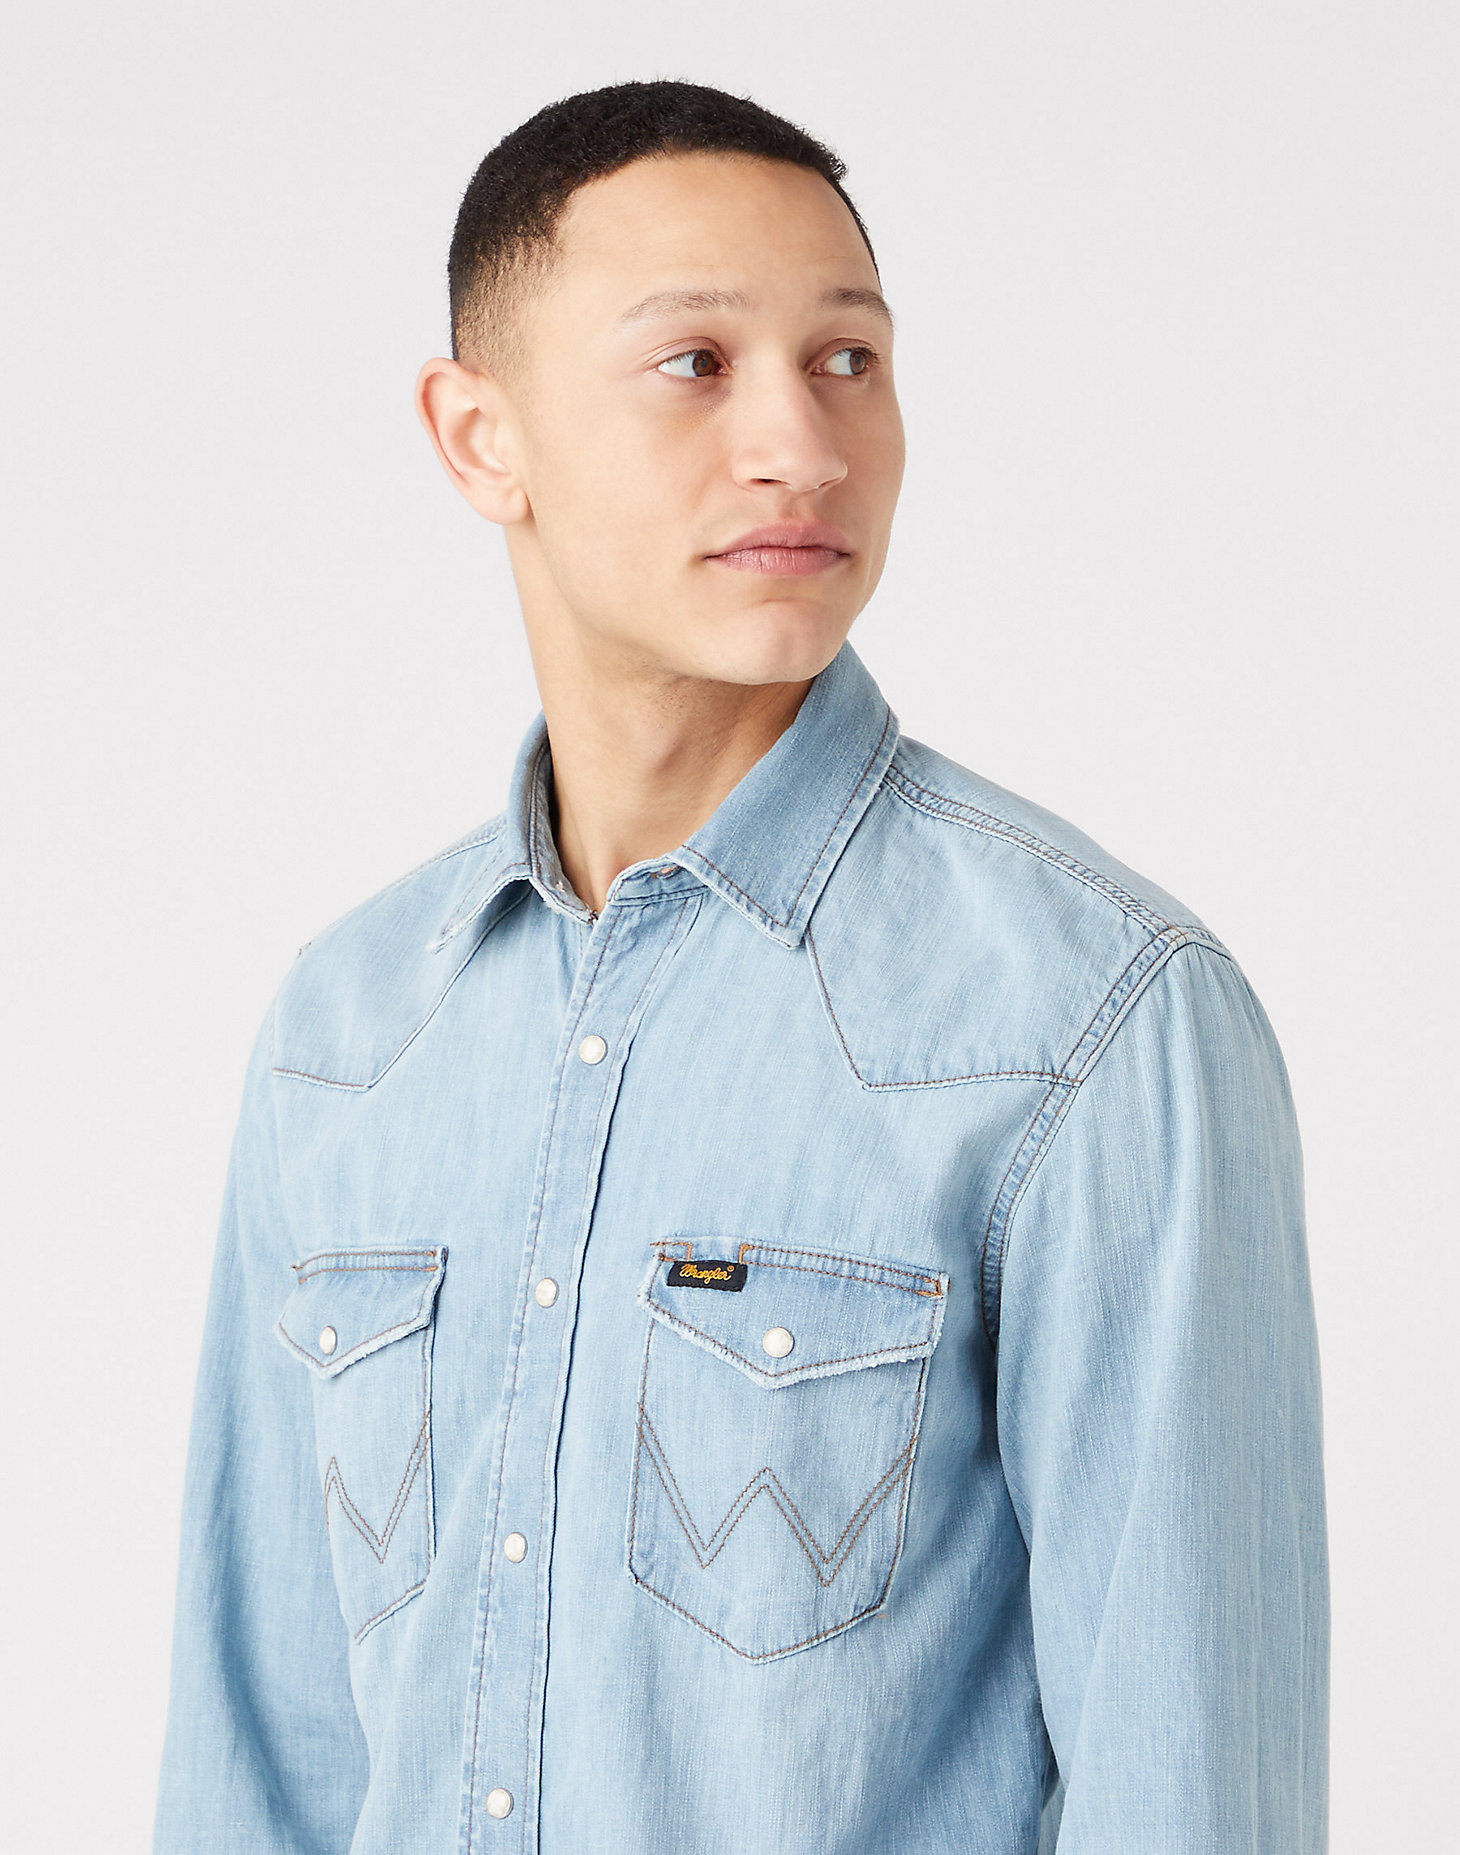 Long Sleeve Workshirt in Icy Blue alternative view 3